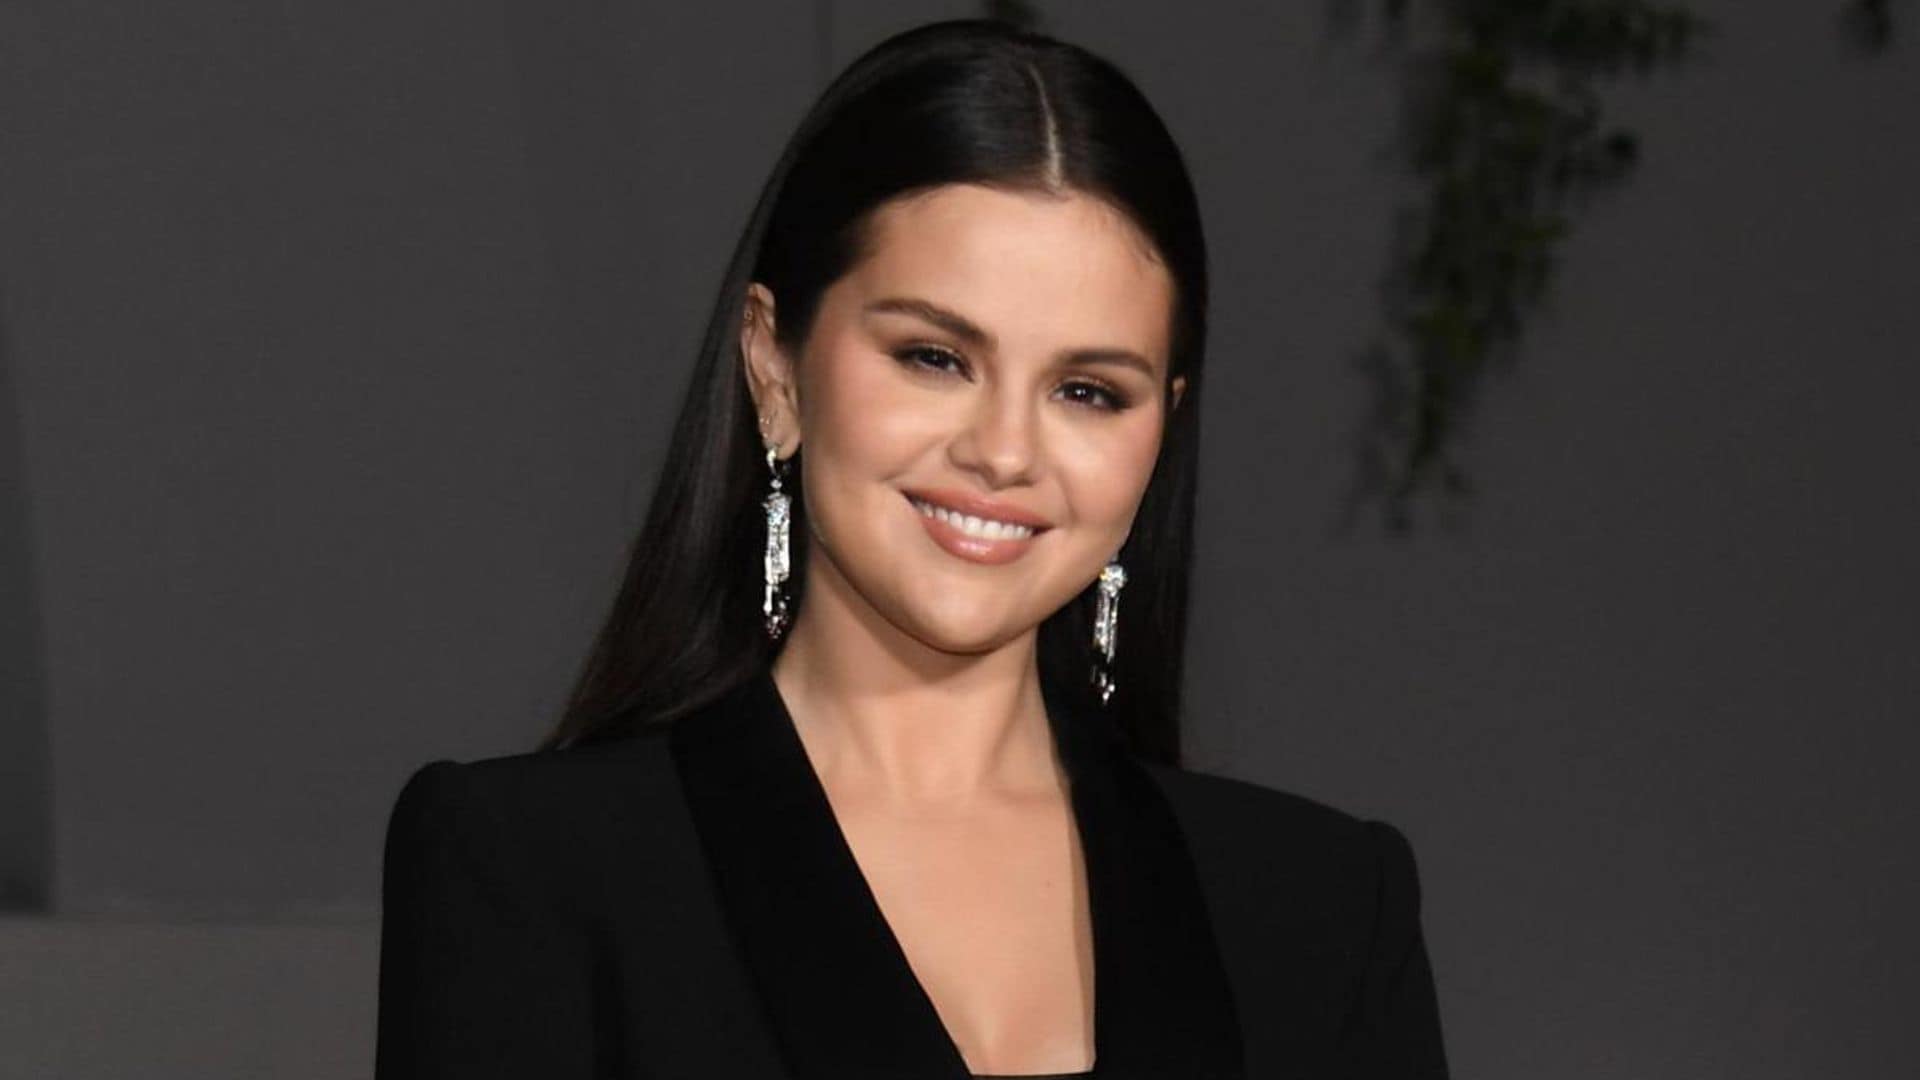 Selena Gomez doesn’t plan on watching her documentary ever again ‘It’s triggering’